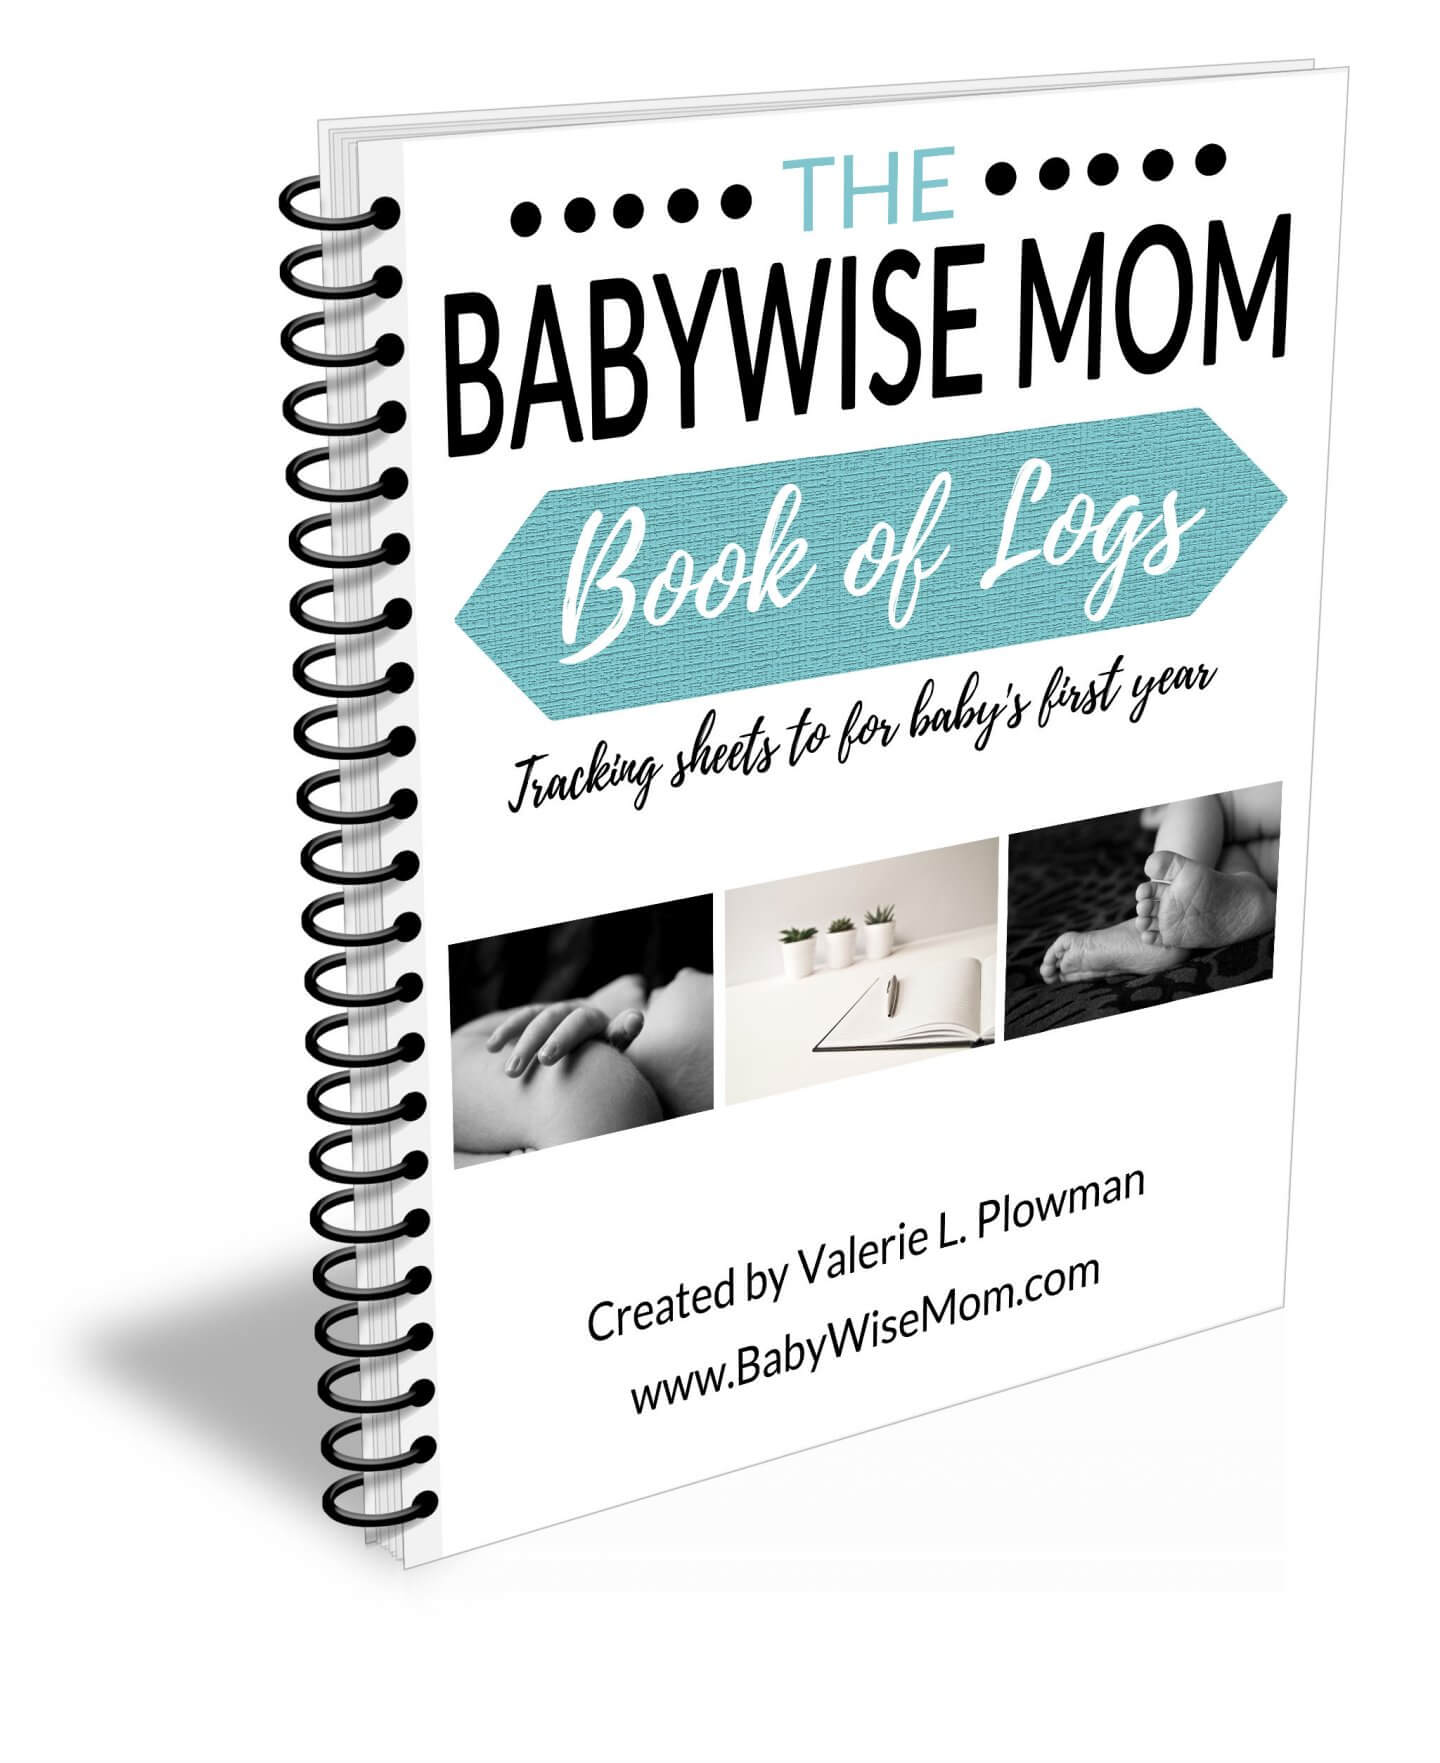 The Babywise Mom Book of Logs eBook cover